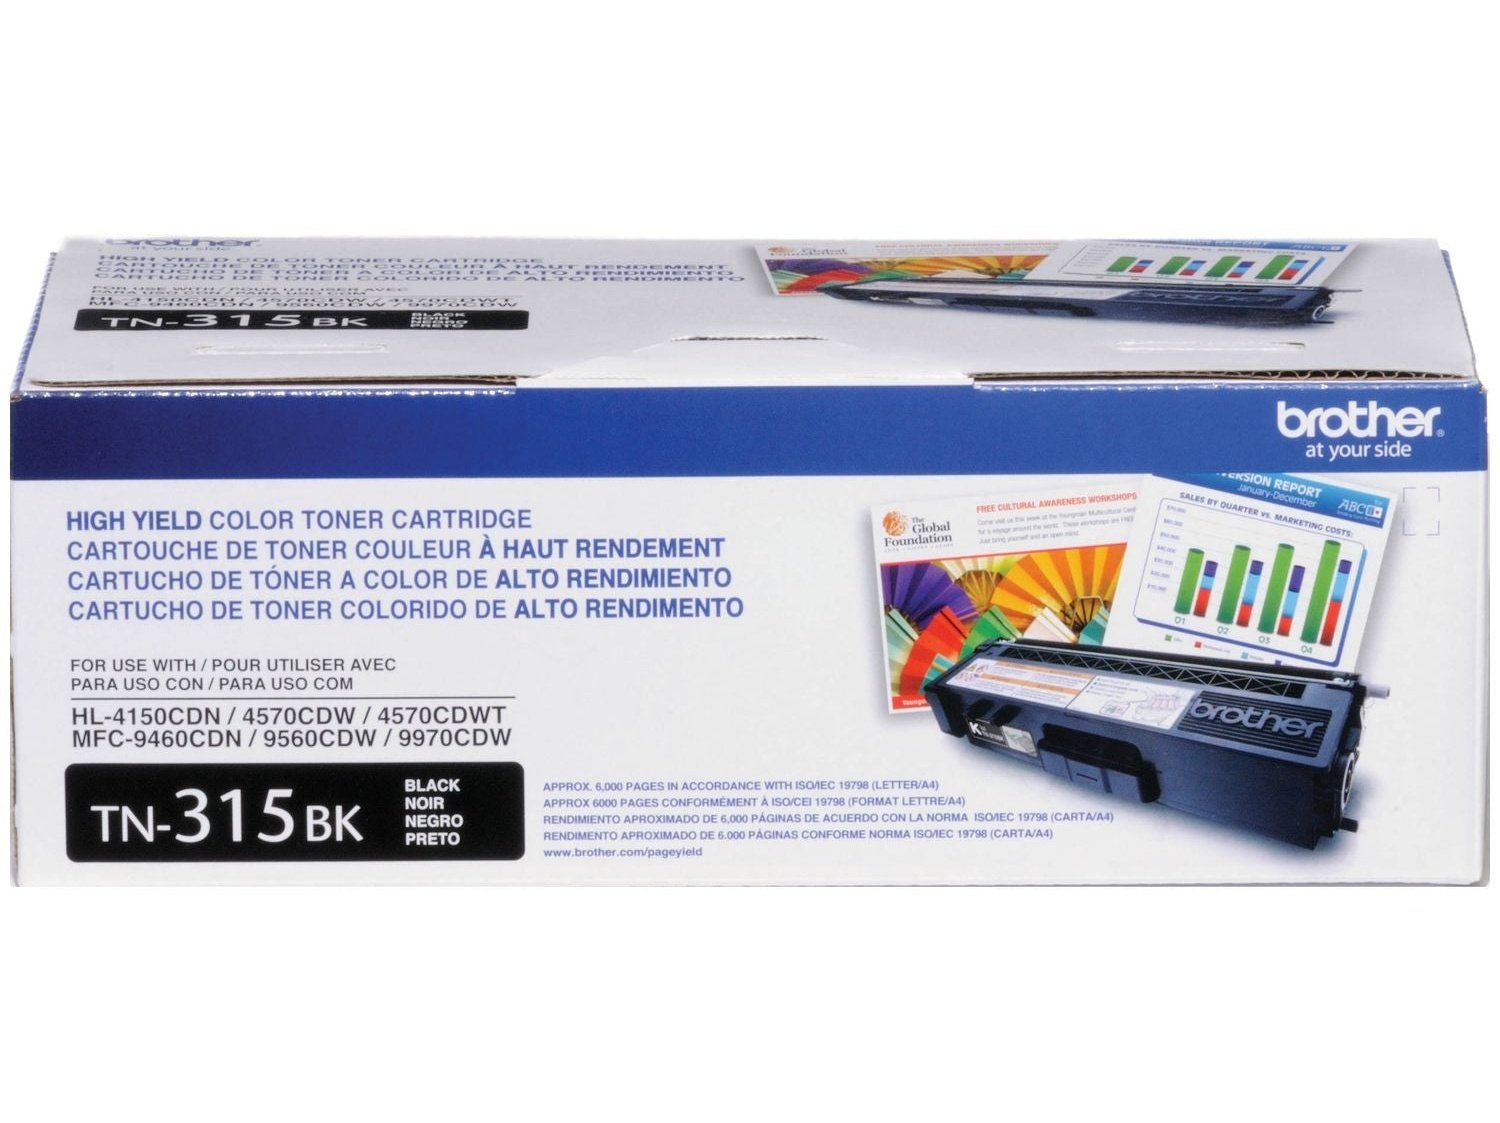 ICU Compatible/ OEM Get Brother ICU-TN-315-BKH Yields 3500 Pages TN-315 Black High Yield 6000 Pages Toner Cartridge (TN315BK) - Ink Cartridges USA